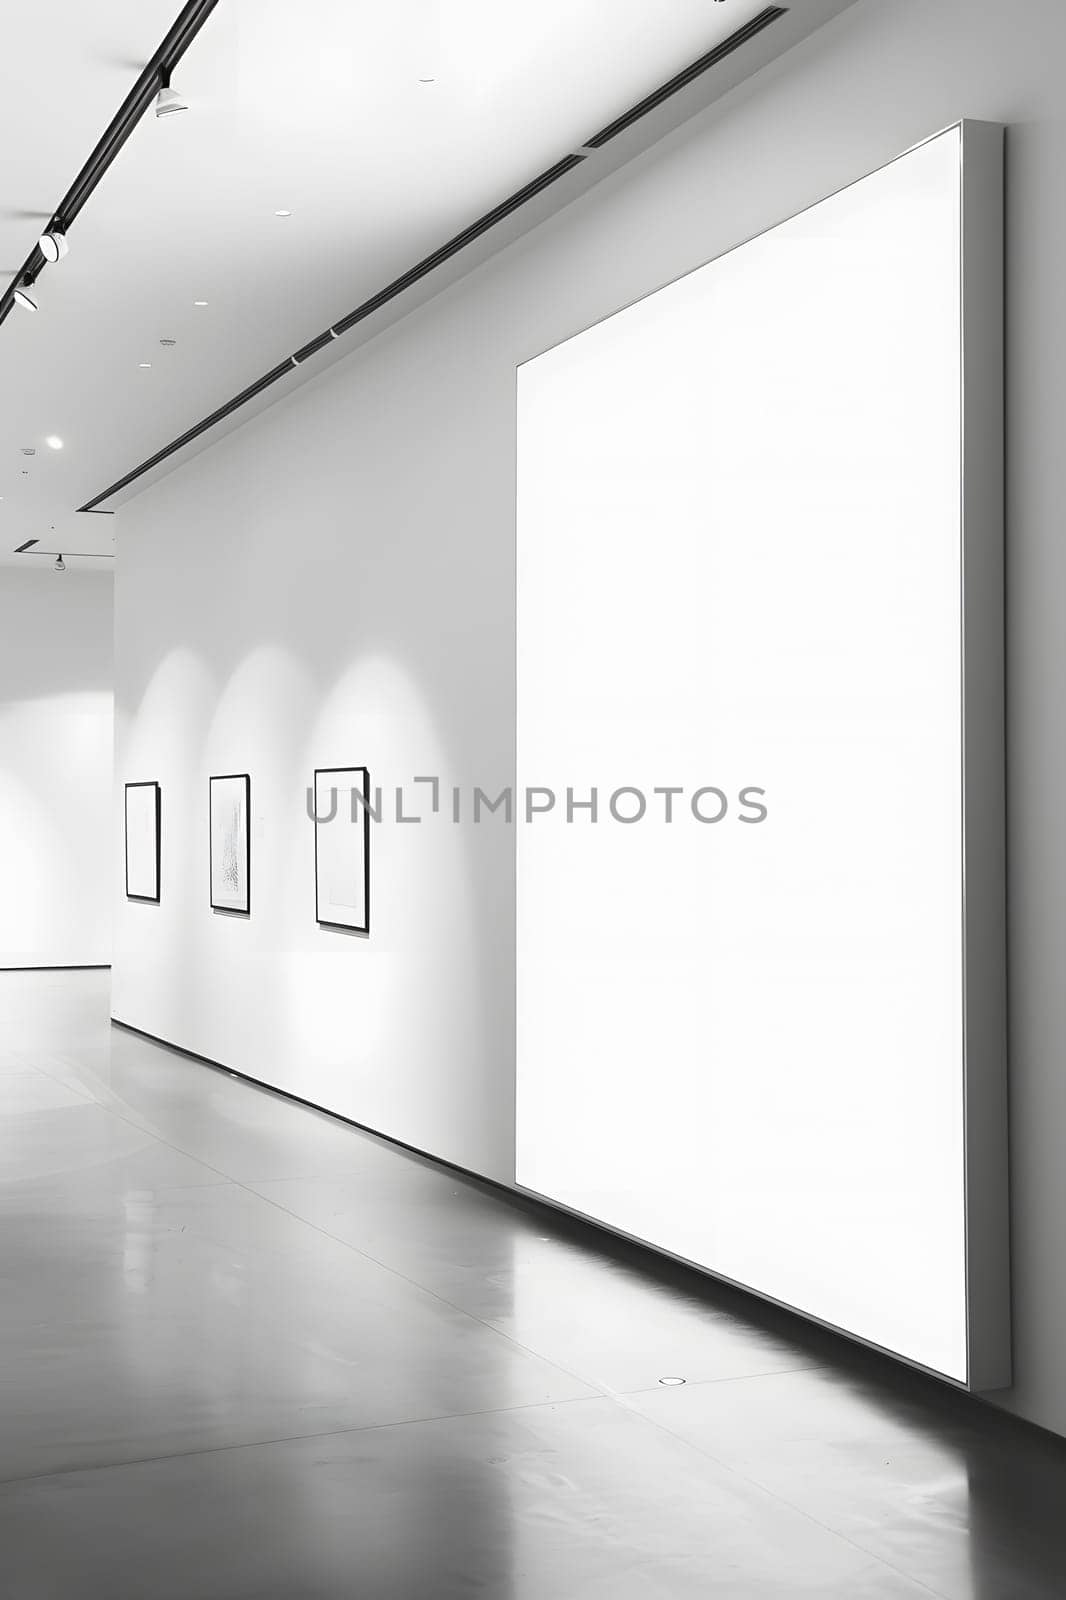 A grey hallway with a large rectangular white billboard as the main fixture on the wood flooring. The monochrome art and glass elements add tints and shades to the monochrome photography